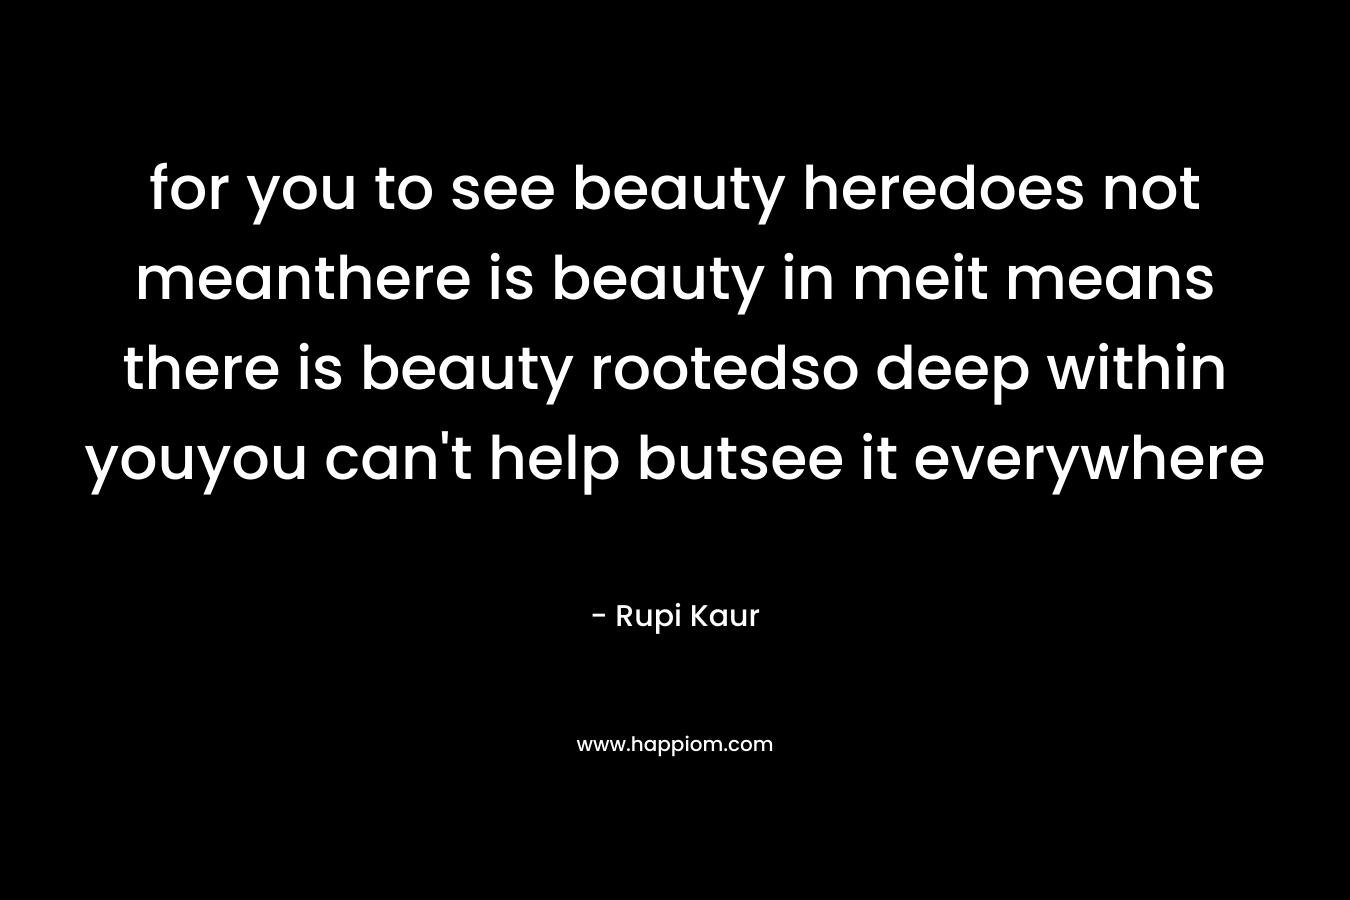 for you to see beauty heredoes not meanthere is beauty in meit means there is beauty rootedso deep within youyou can’t help butsee it everywhere – Rupi Kaur